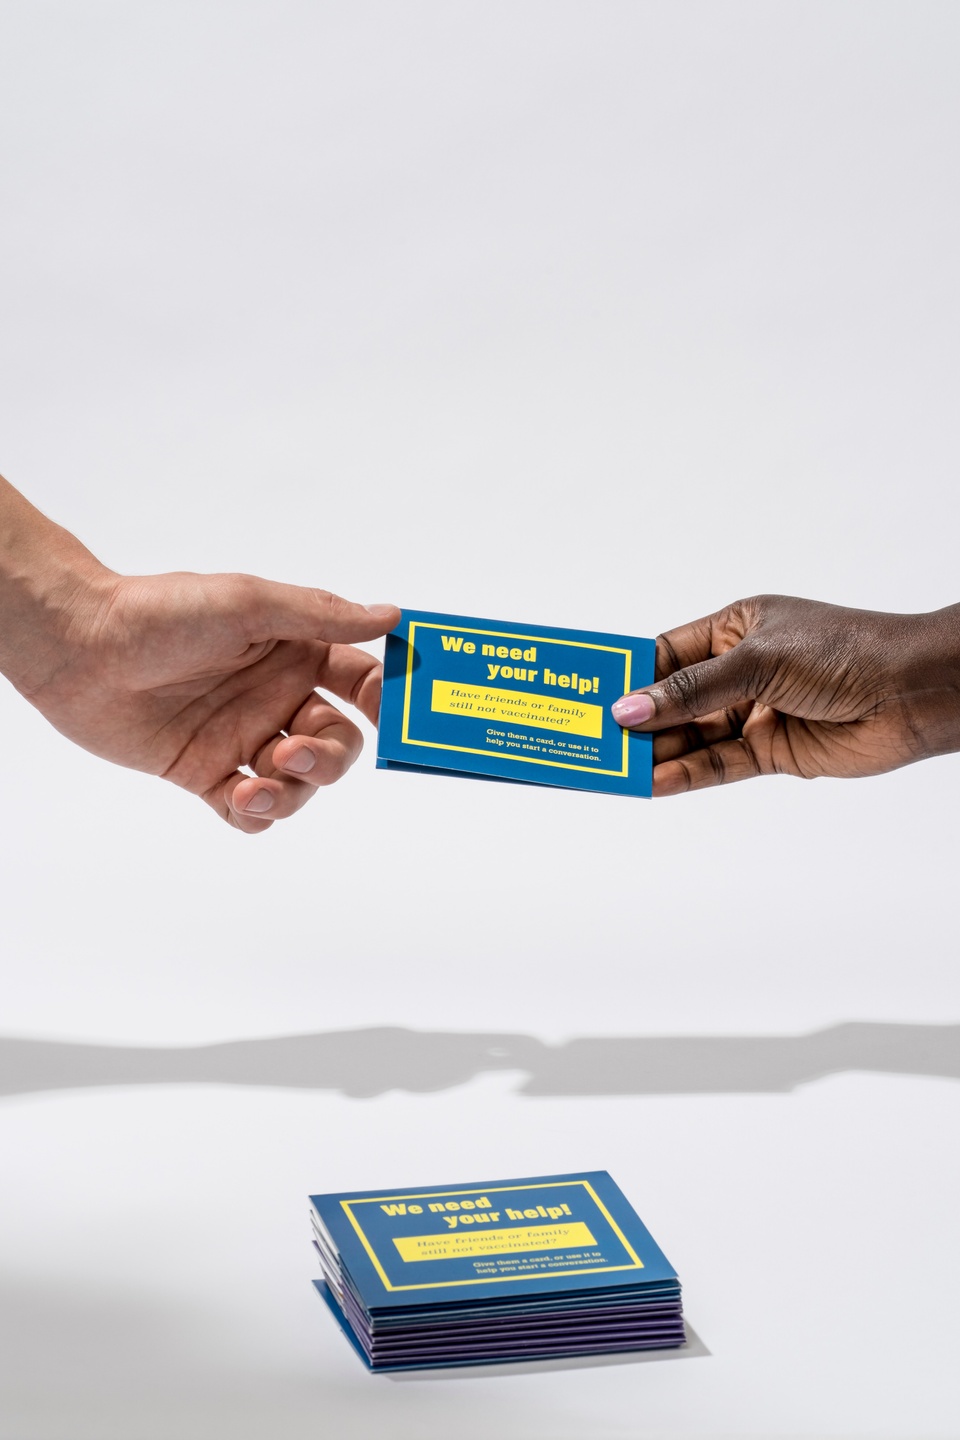 Cropped close, a woman hands a blue and yellow card holder to a man. A stack of extra holders is in front of them.